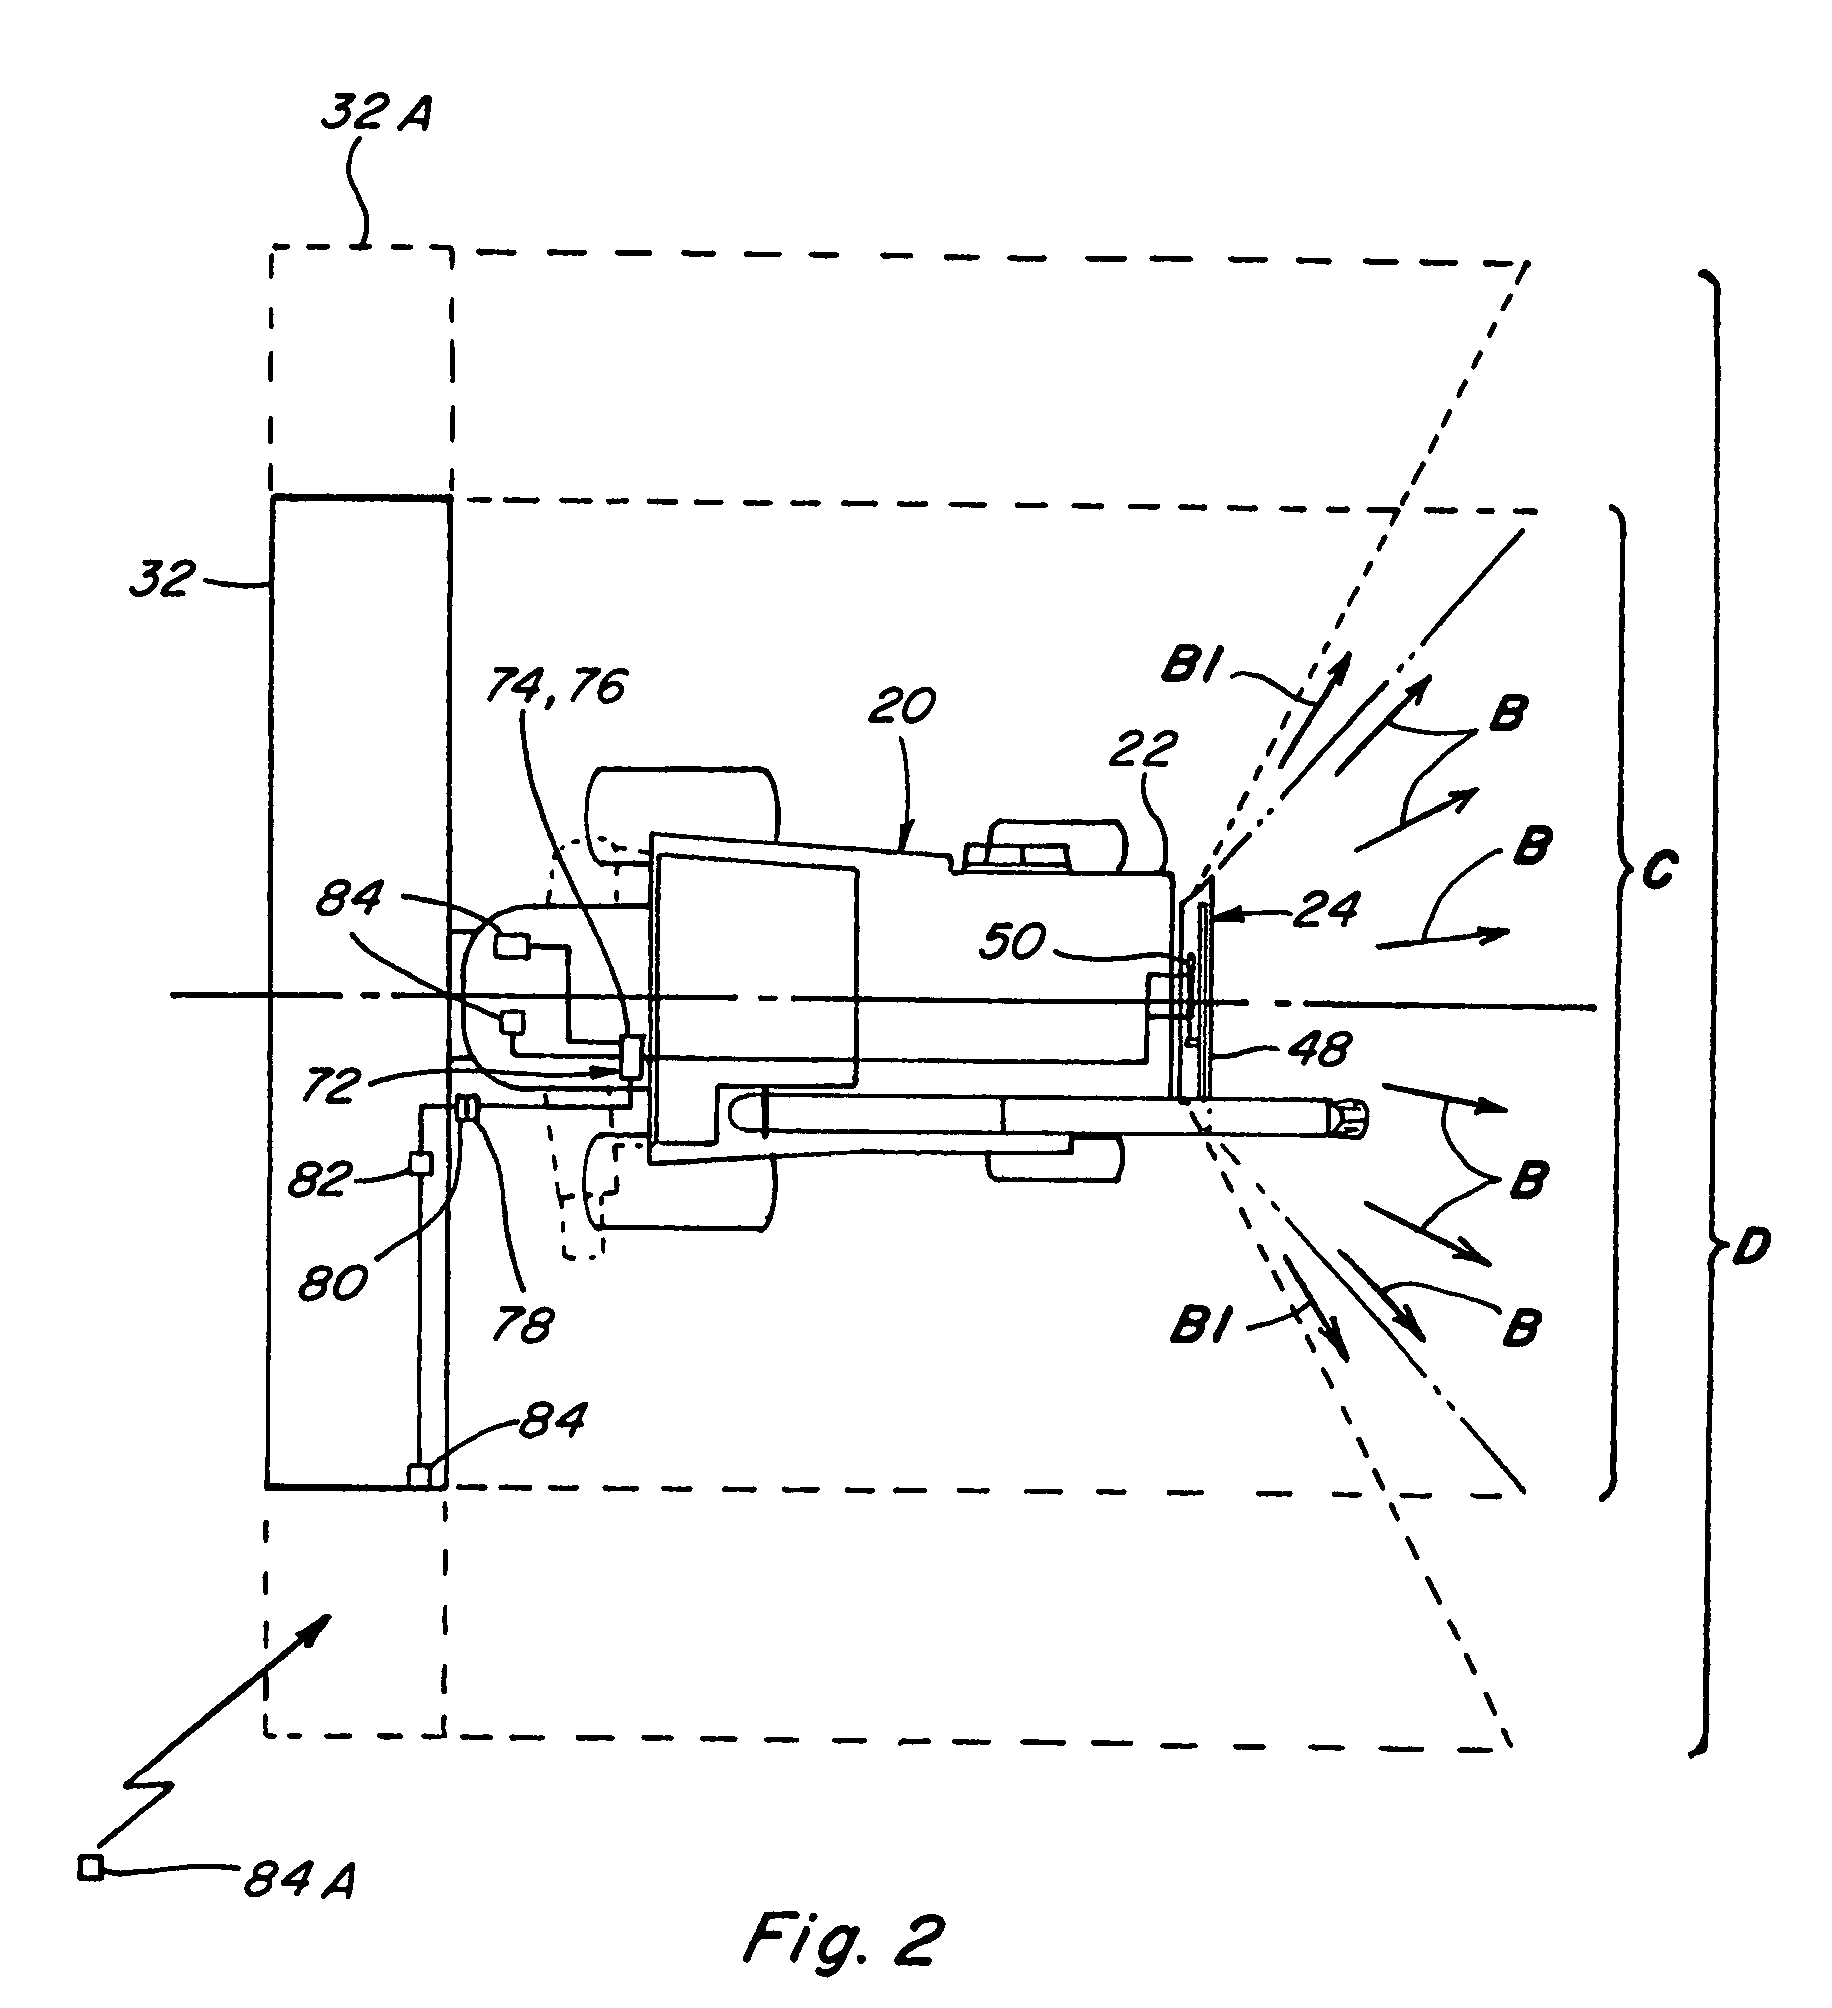 Apparatus and method for automatically setting operating parameters for a remotely adjustable spreader of an agricultural harvesting machine